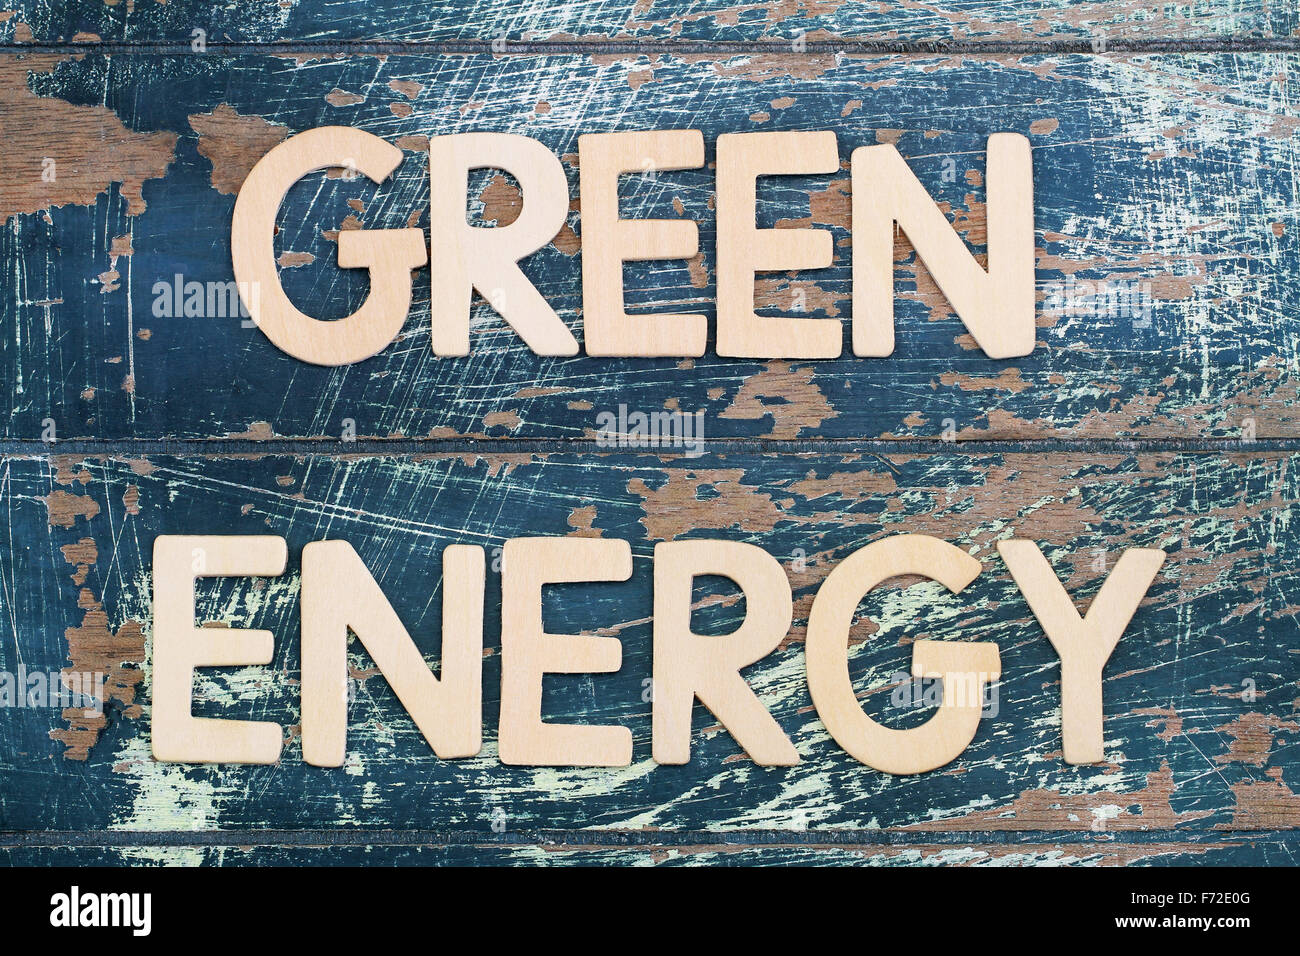 Green energy written with wooden letters on rustic surface Stock Photo